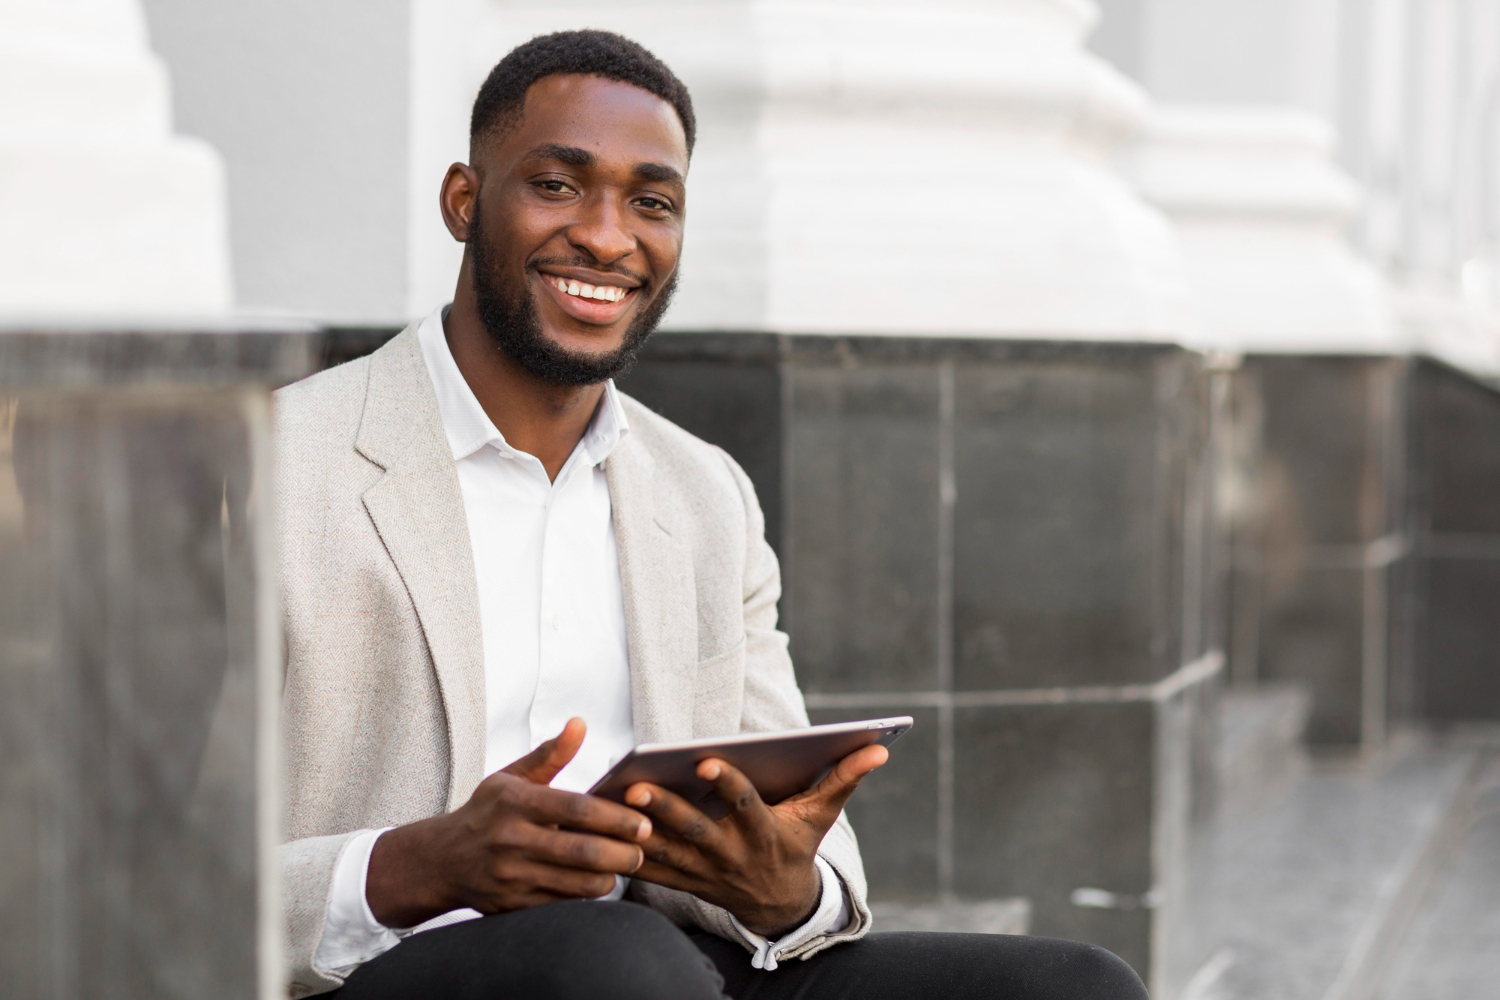 Smiling business man holding a tablet